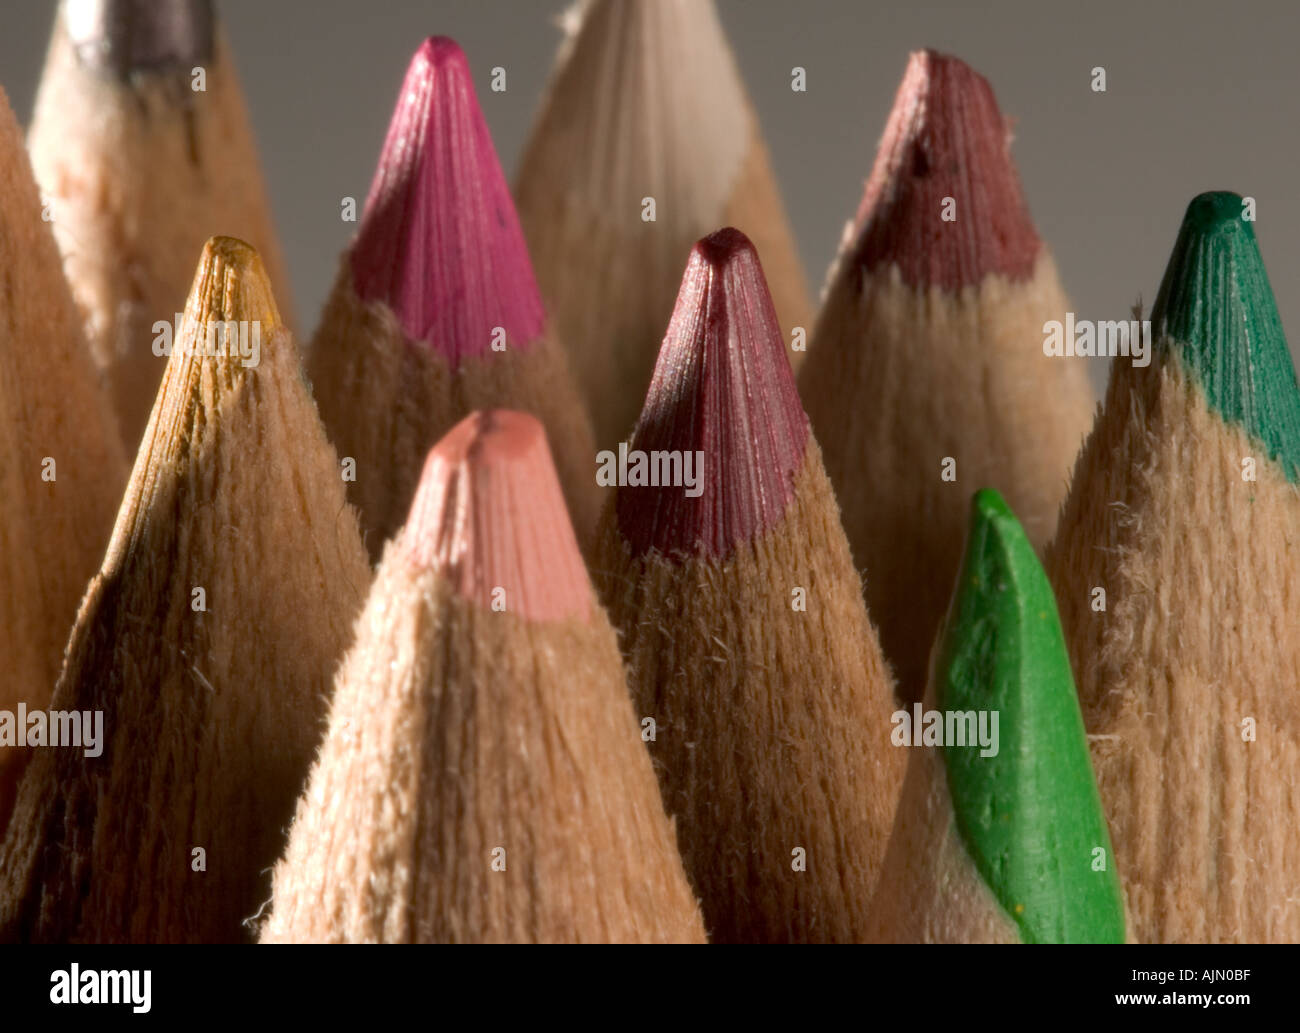 Group of coloured pencil tips Stock Photo